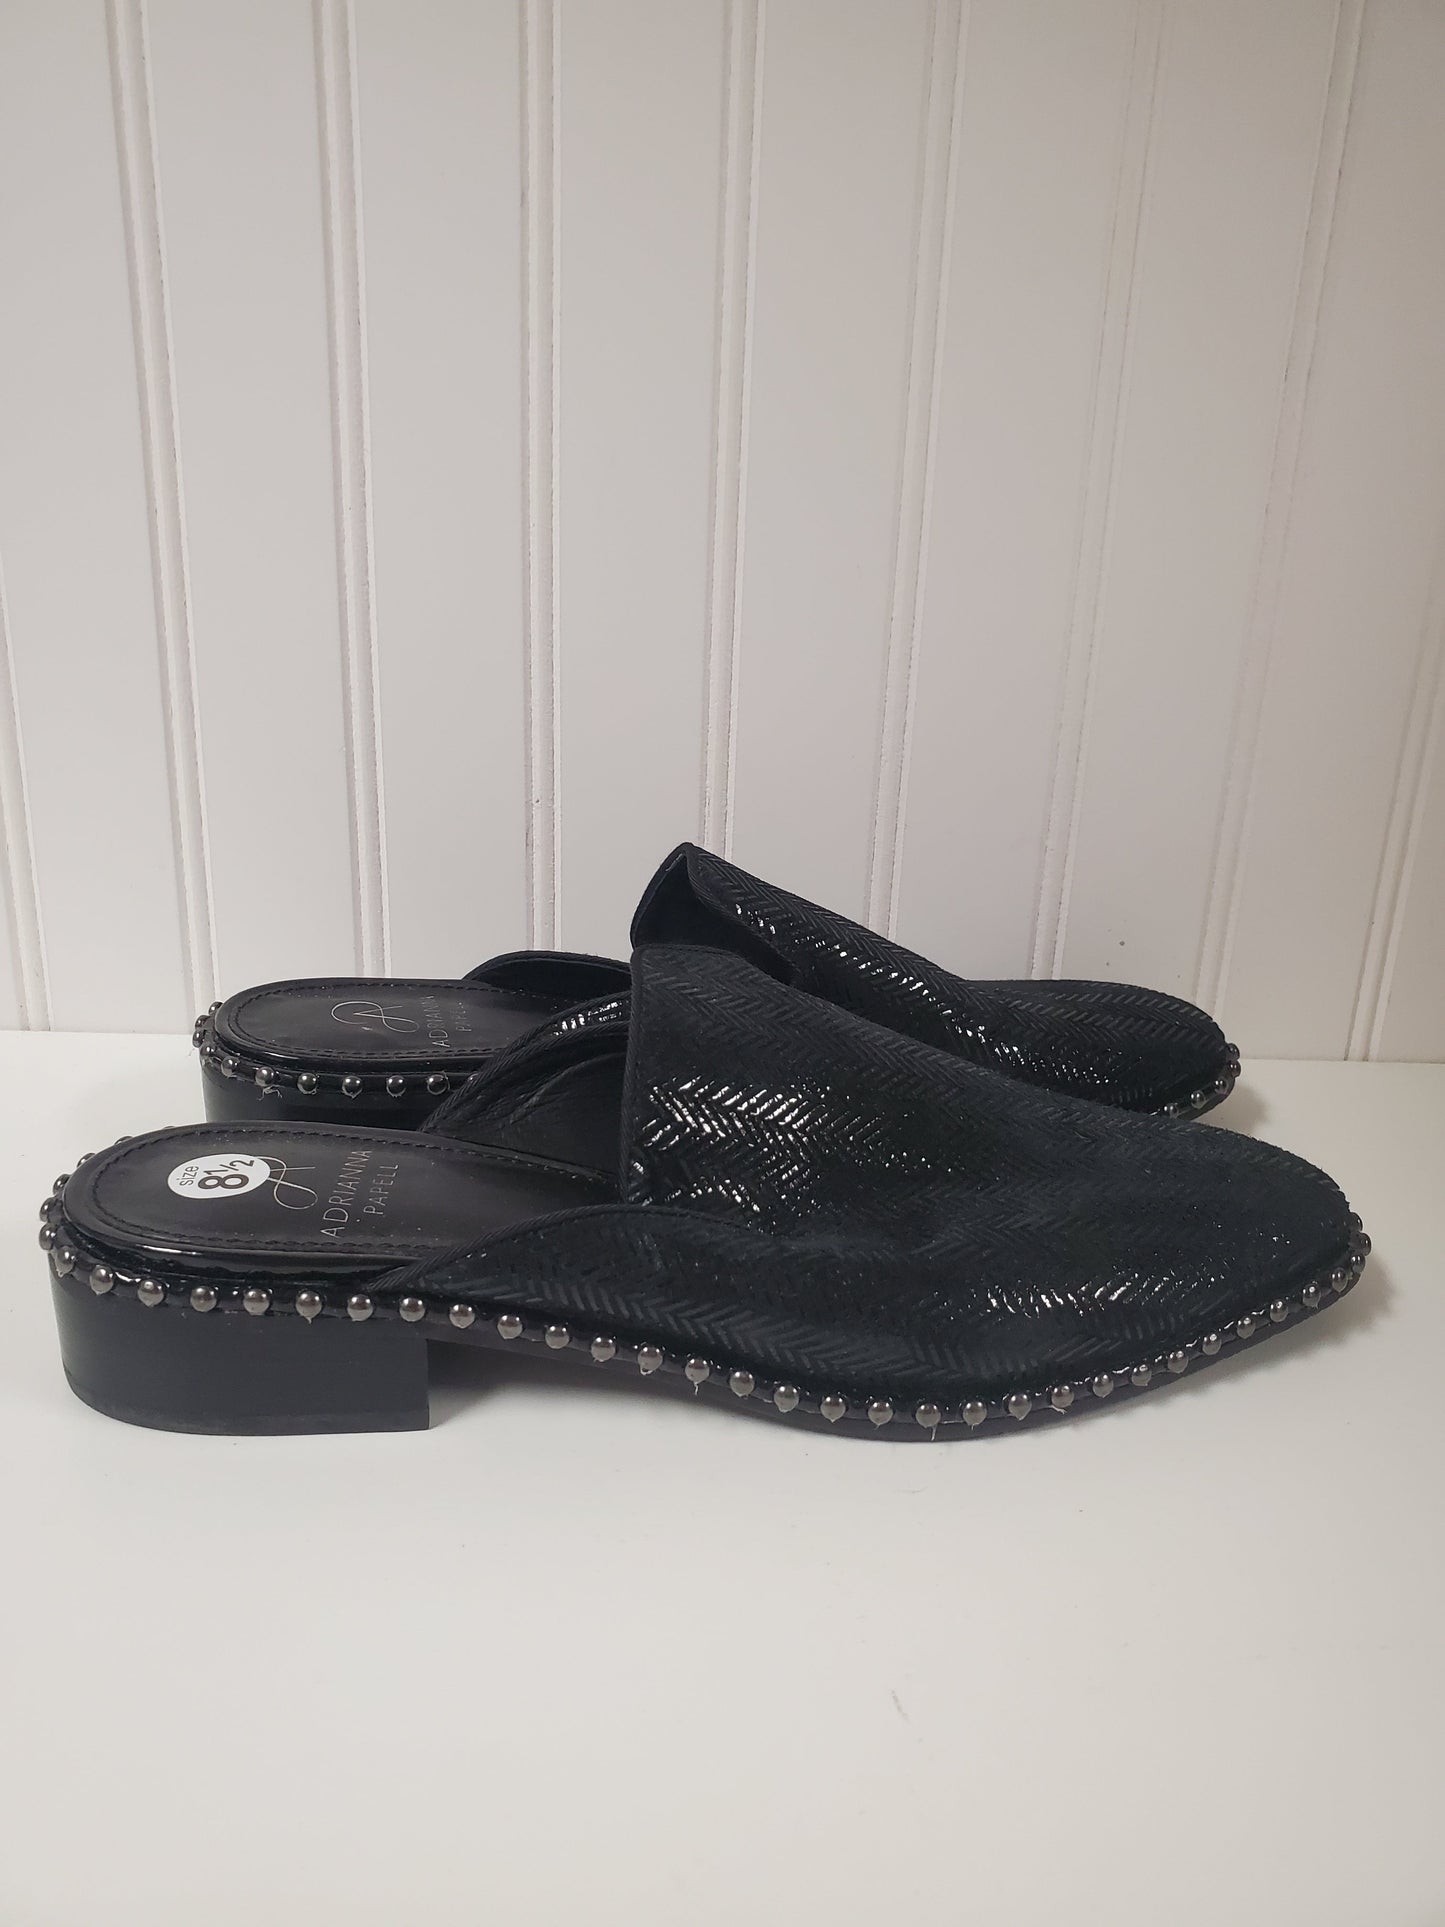 Black Shoes Flats Adrianna Papell, Size 8.5